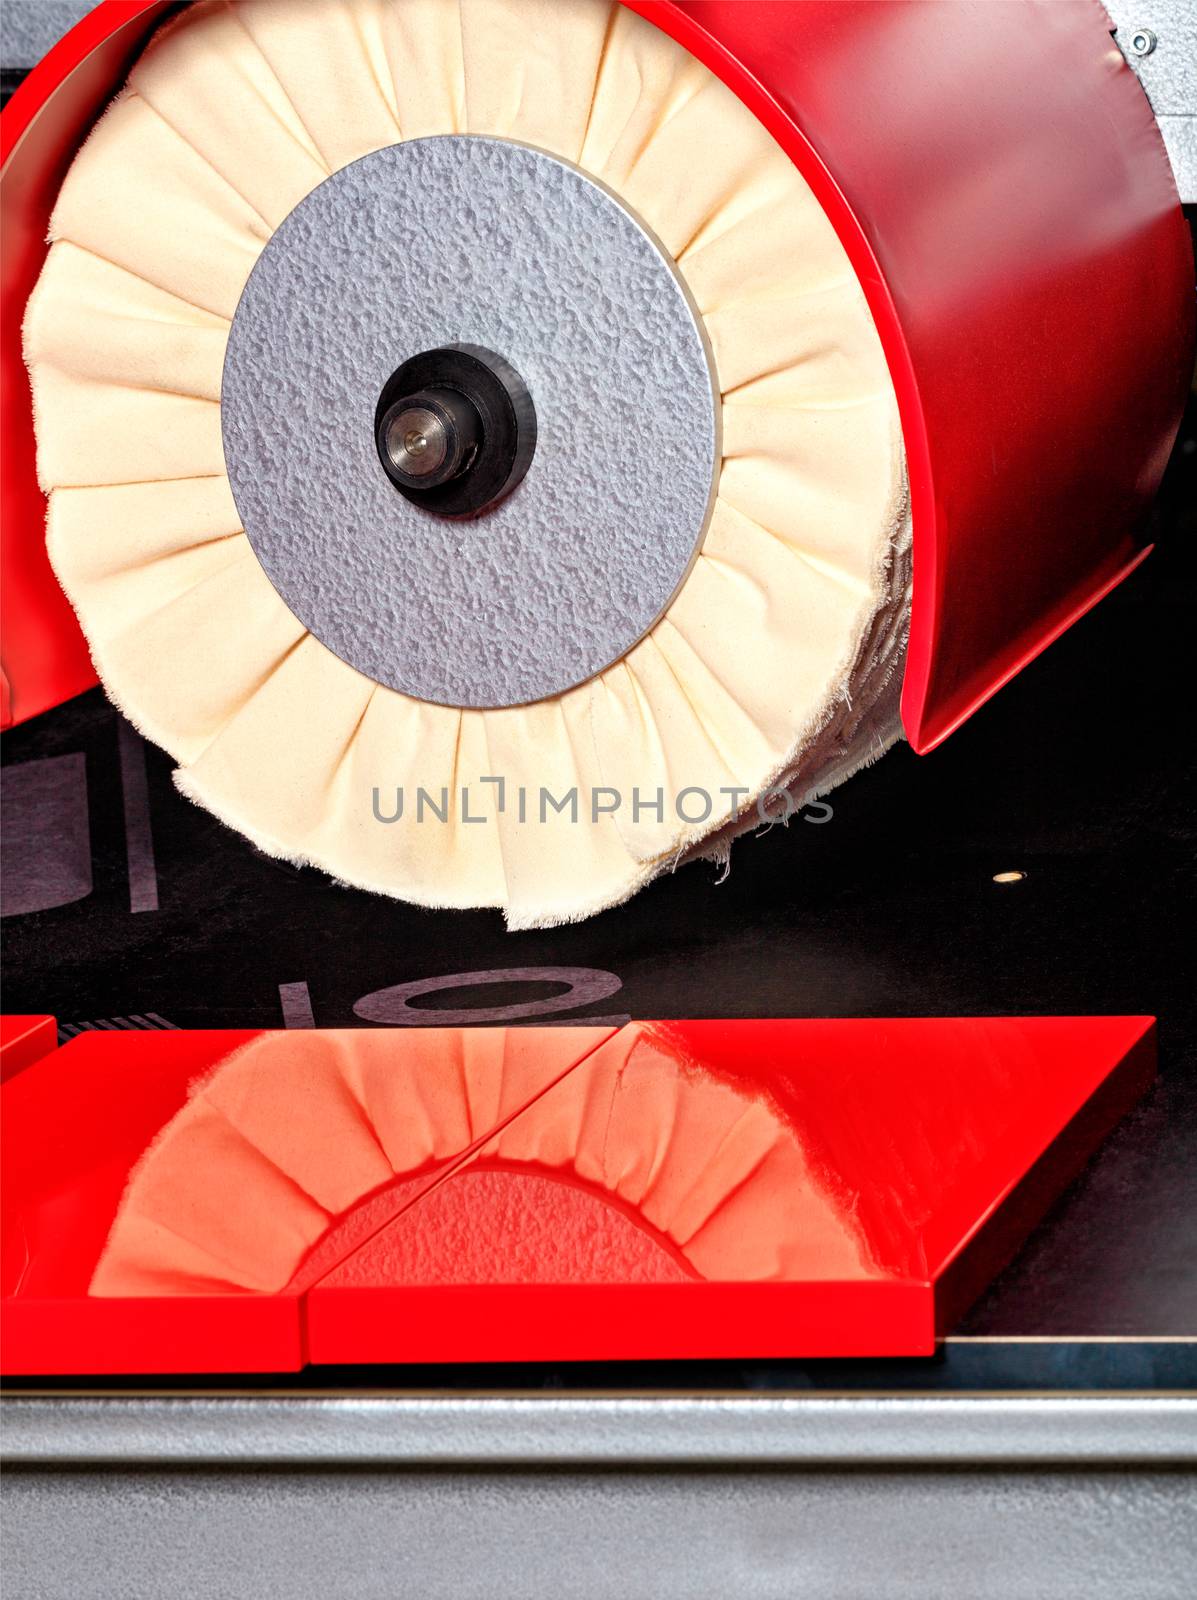 Modern disk polishing machine bright red for finishing grinding and polishing the facade of furniture plates and structures to mirror reflection, close-up.